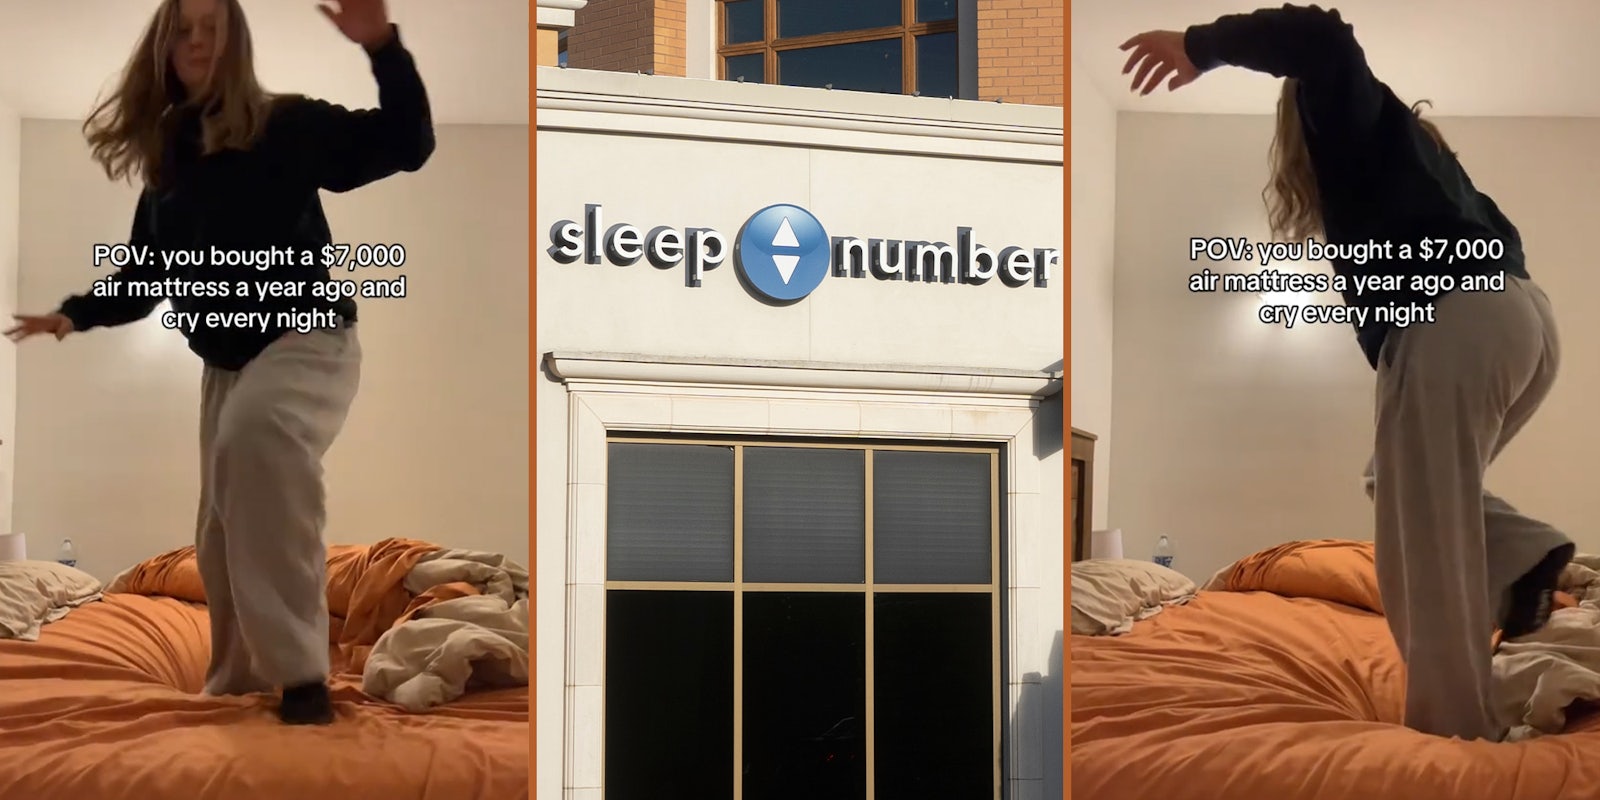 Woman shares regret after buying $7,000 Sleep Number mattress, says company blocked her